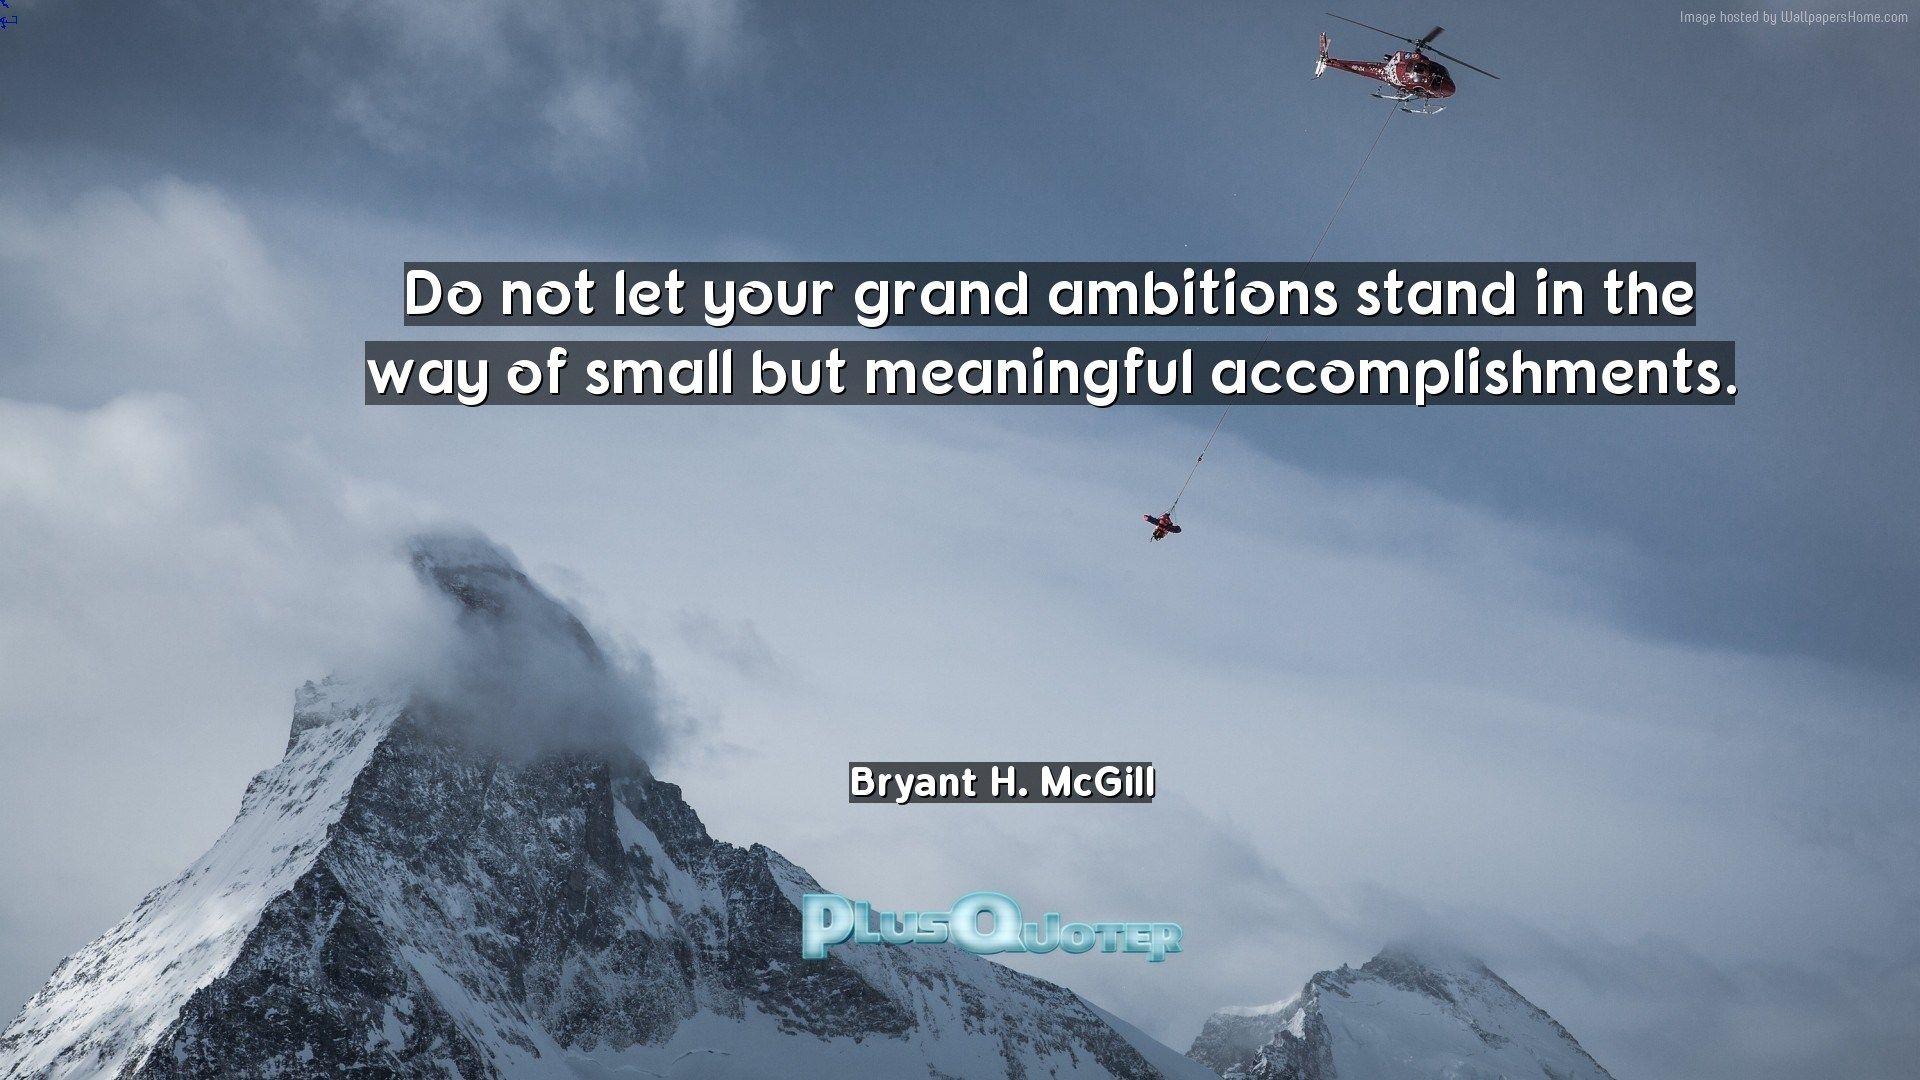 Do not let your grand ambitions stand in the way of small but